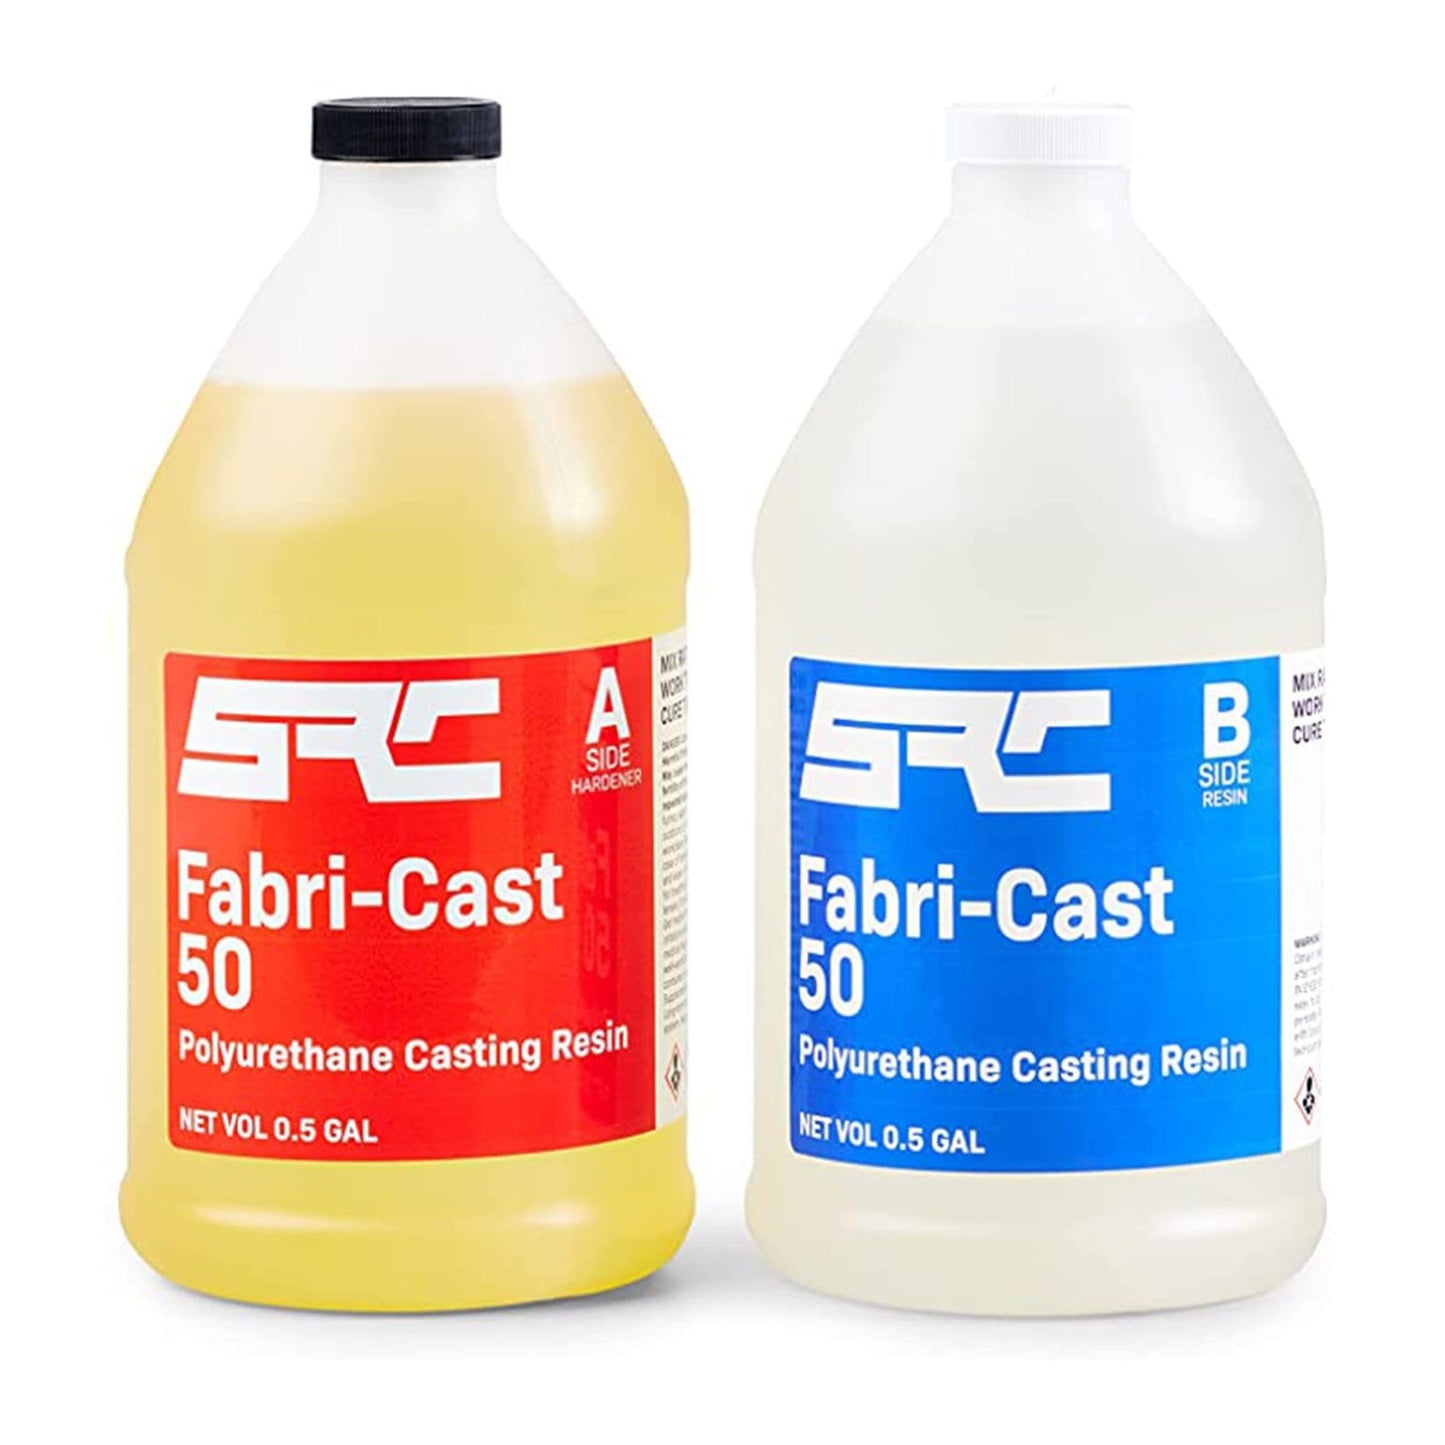 Specialty Resin & Chemical Fabri-Cast 50 [1 Gallon Kit] | 2-Part Polyurethane Casting Resin for Models, Figurines, and Sculptures | Beginner Liquid Molding Set | Ultra Low Viscosity and Fast Curing